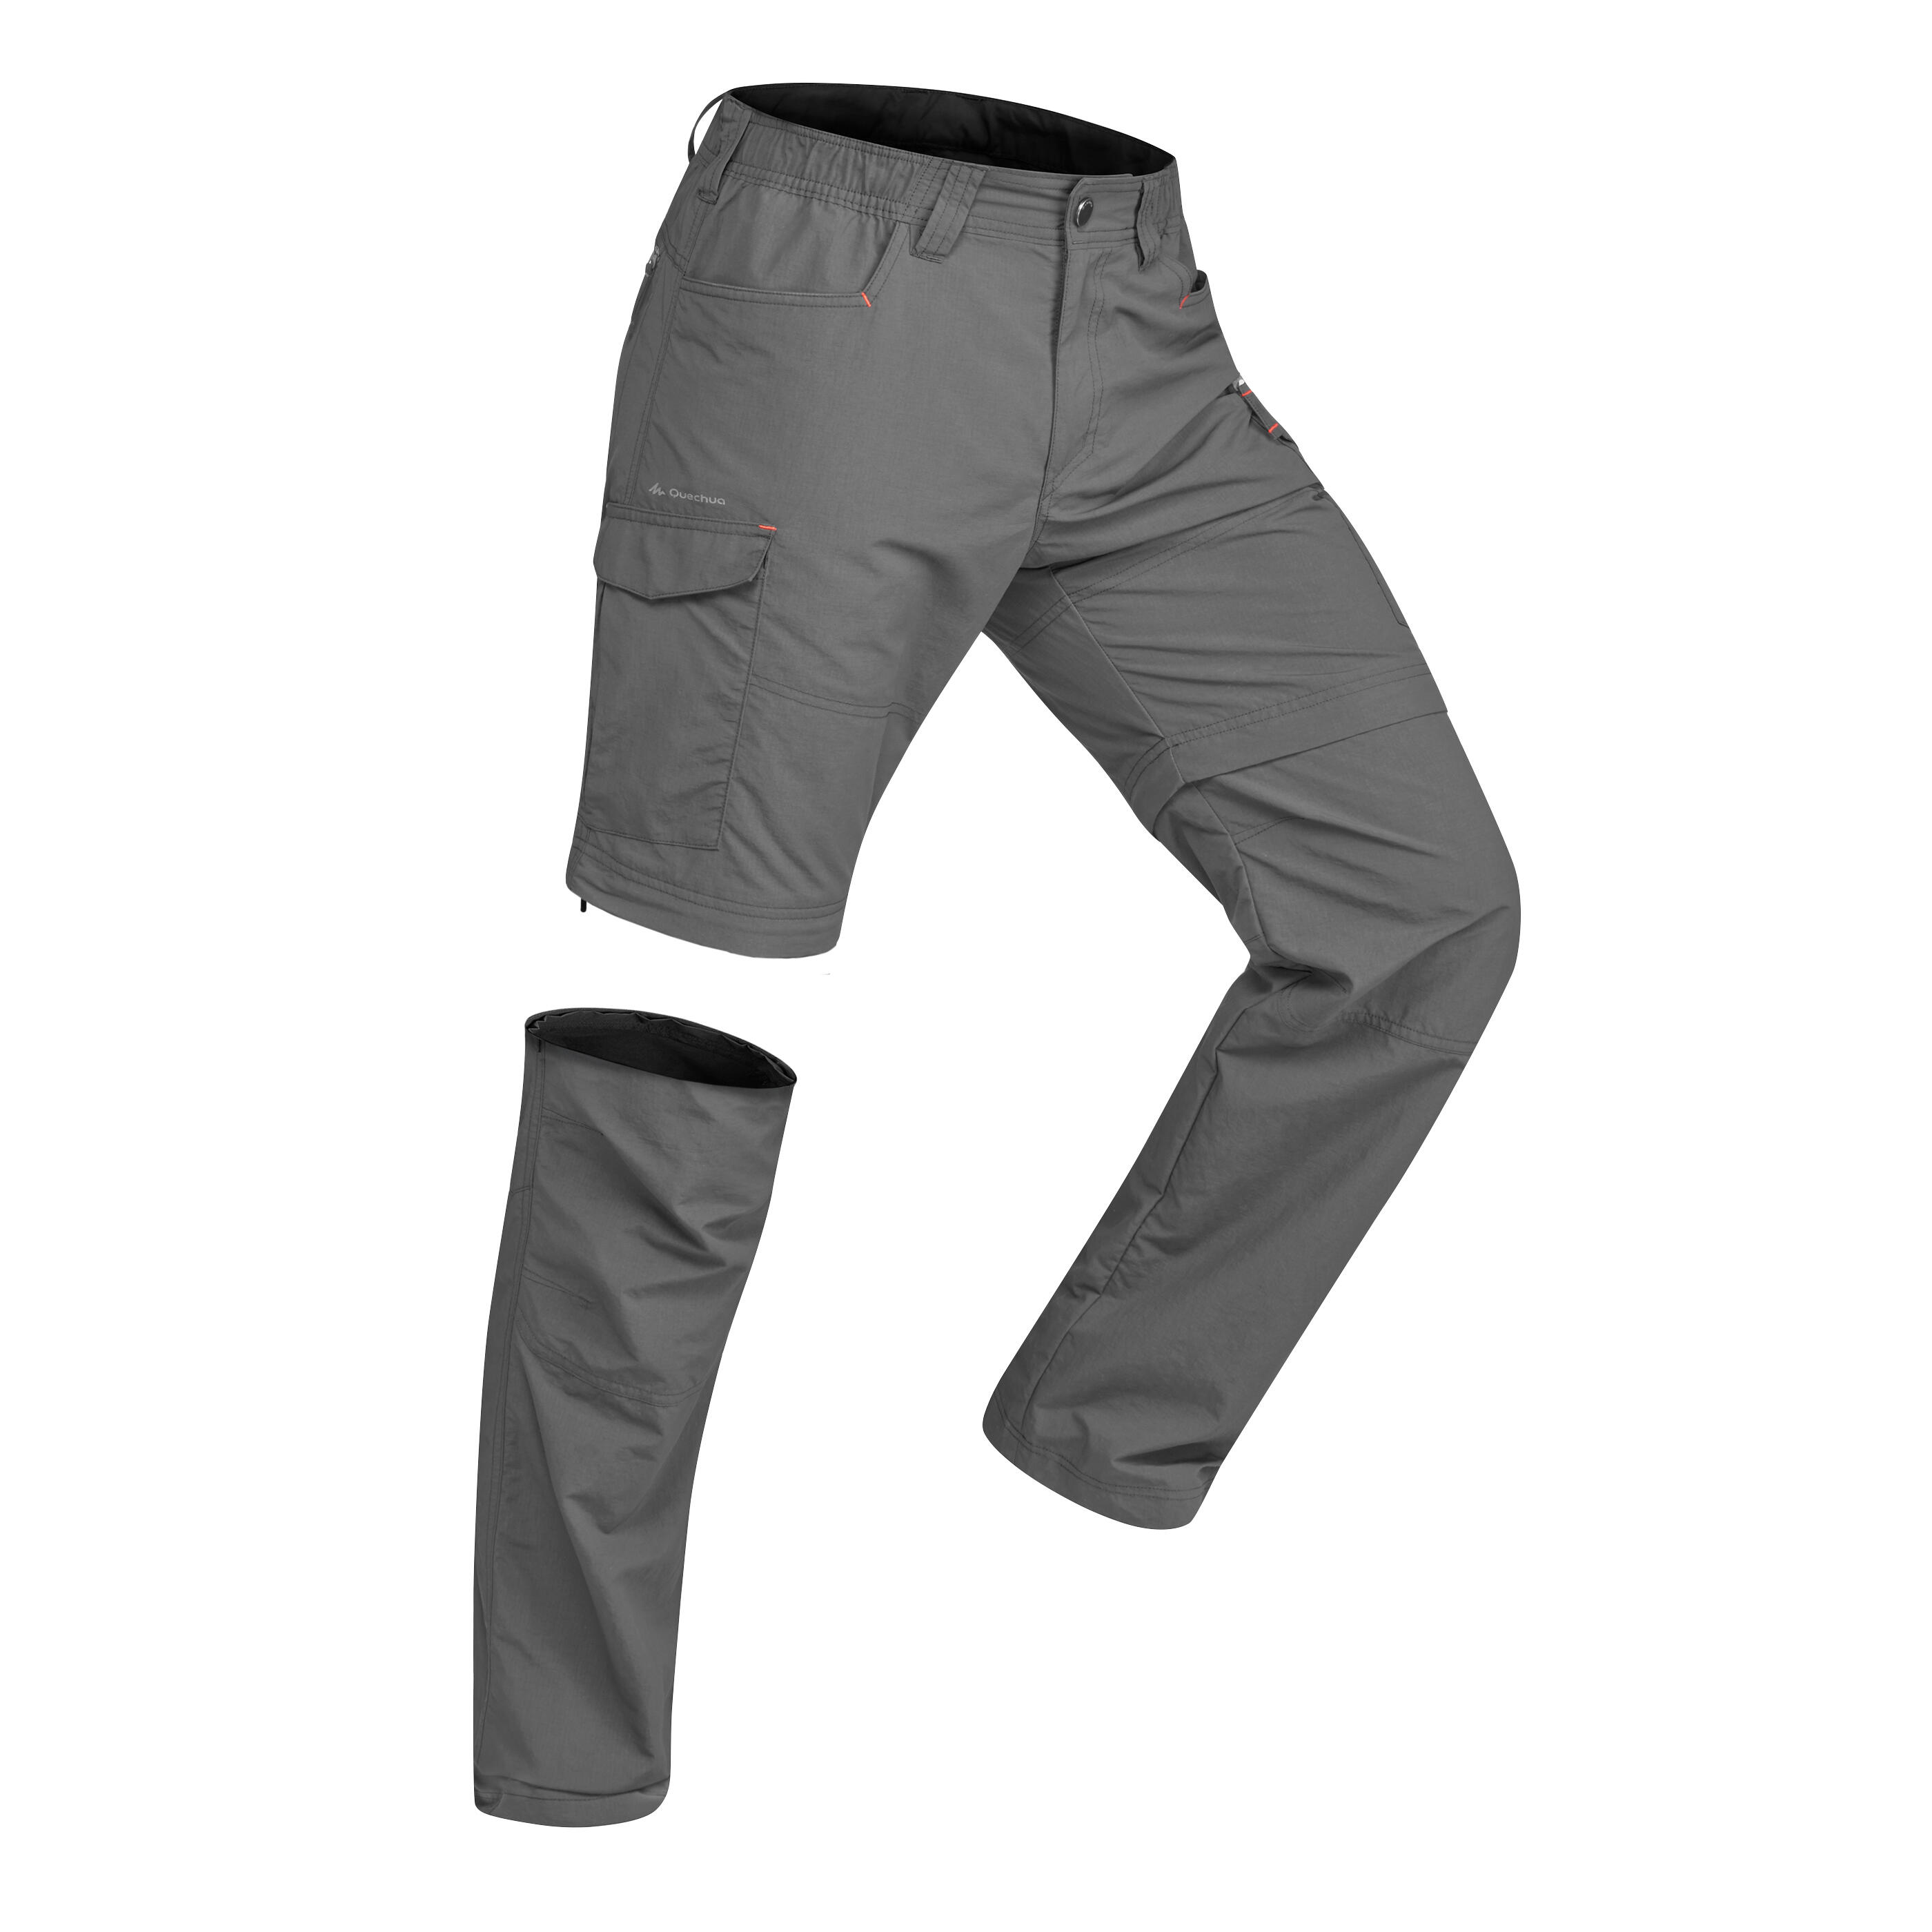 Buy Mens Trousers Online at Decathlon India